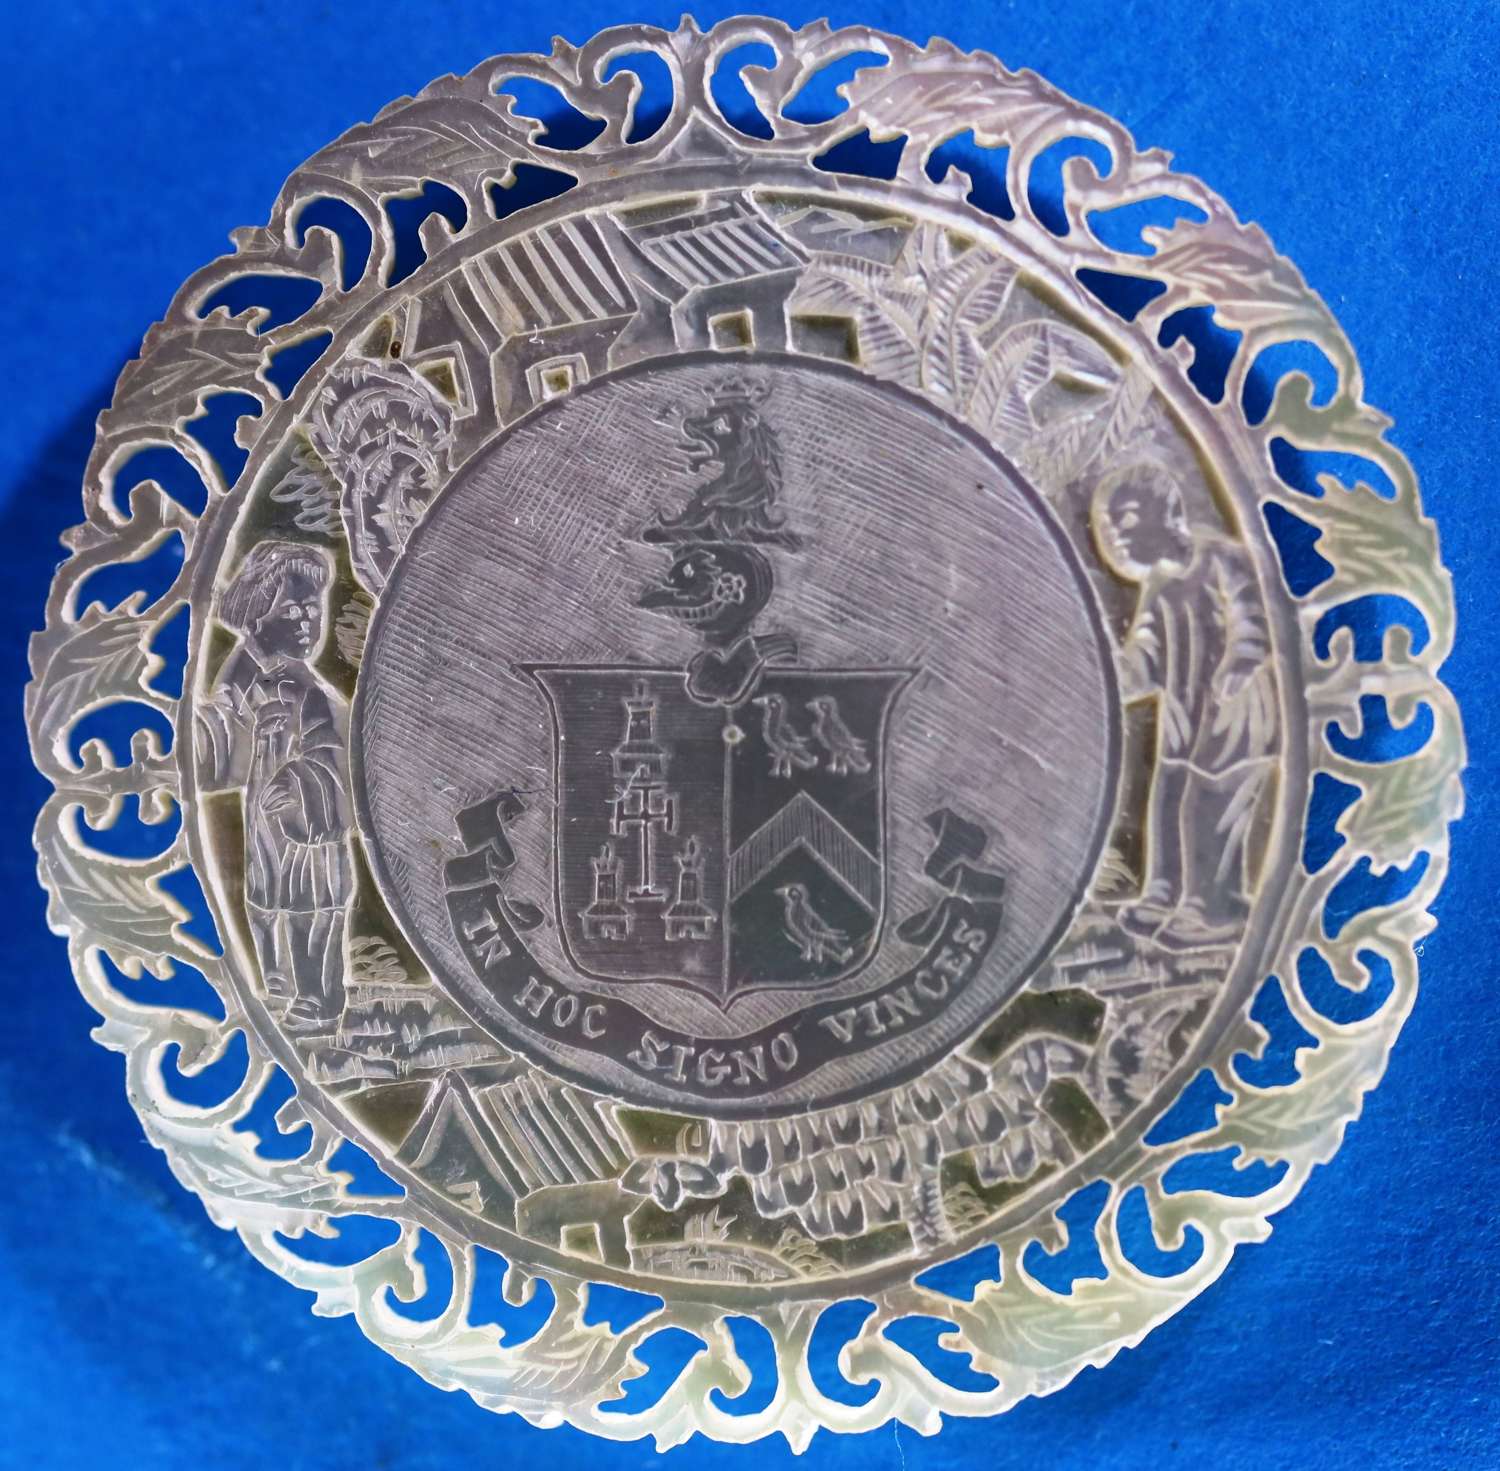 TOP QUALITY FULL ARMORIAL